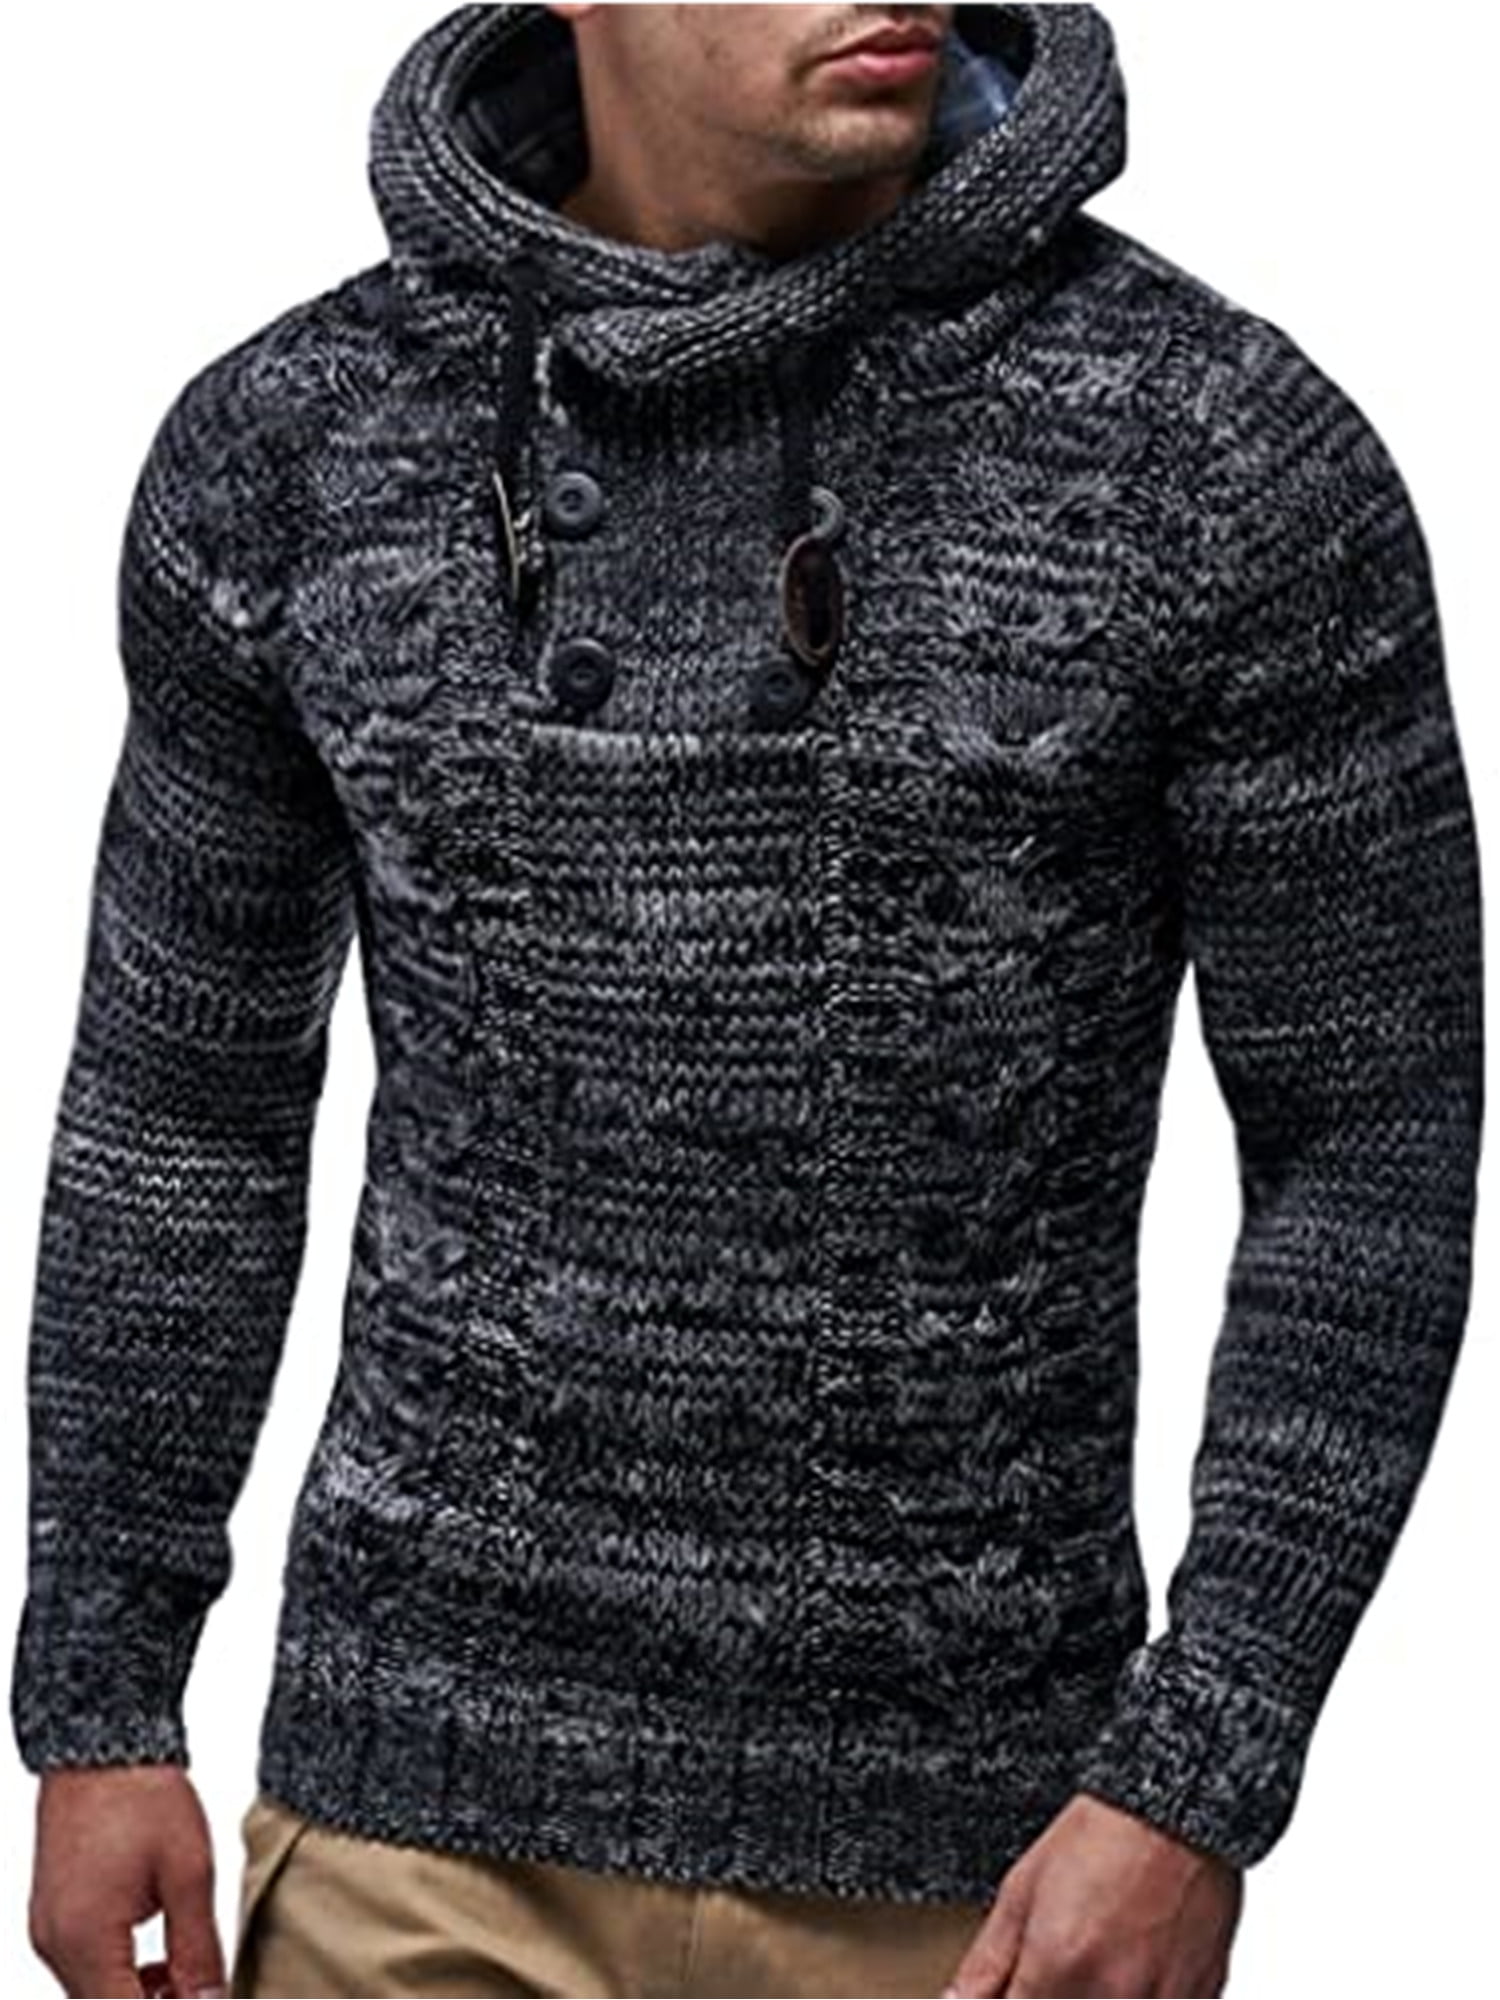 Men Knitted Sweaters Stylish Warm Button Pullover Black White Gray Pullover Knit 